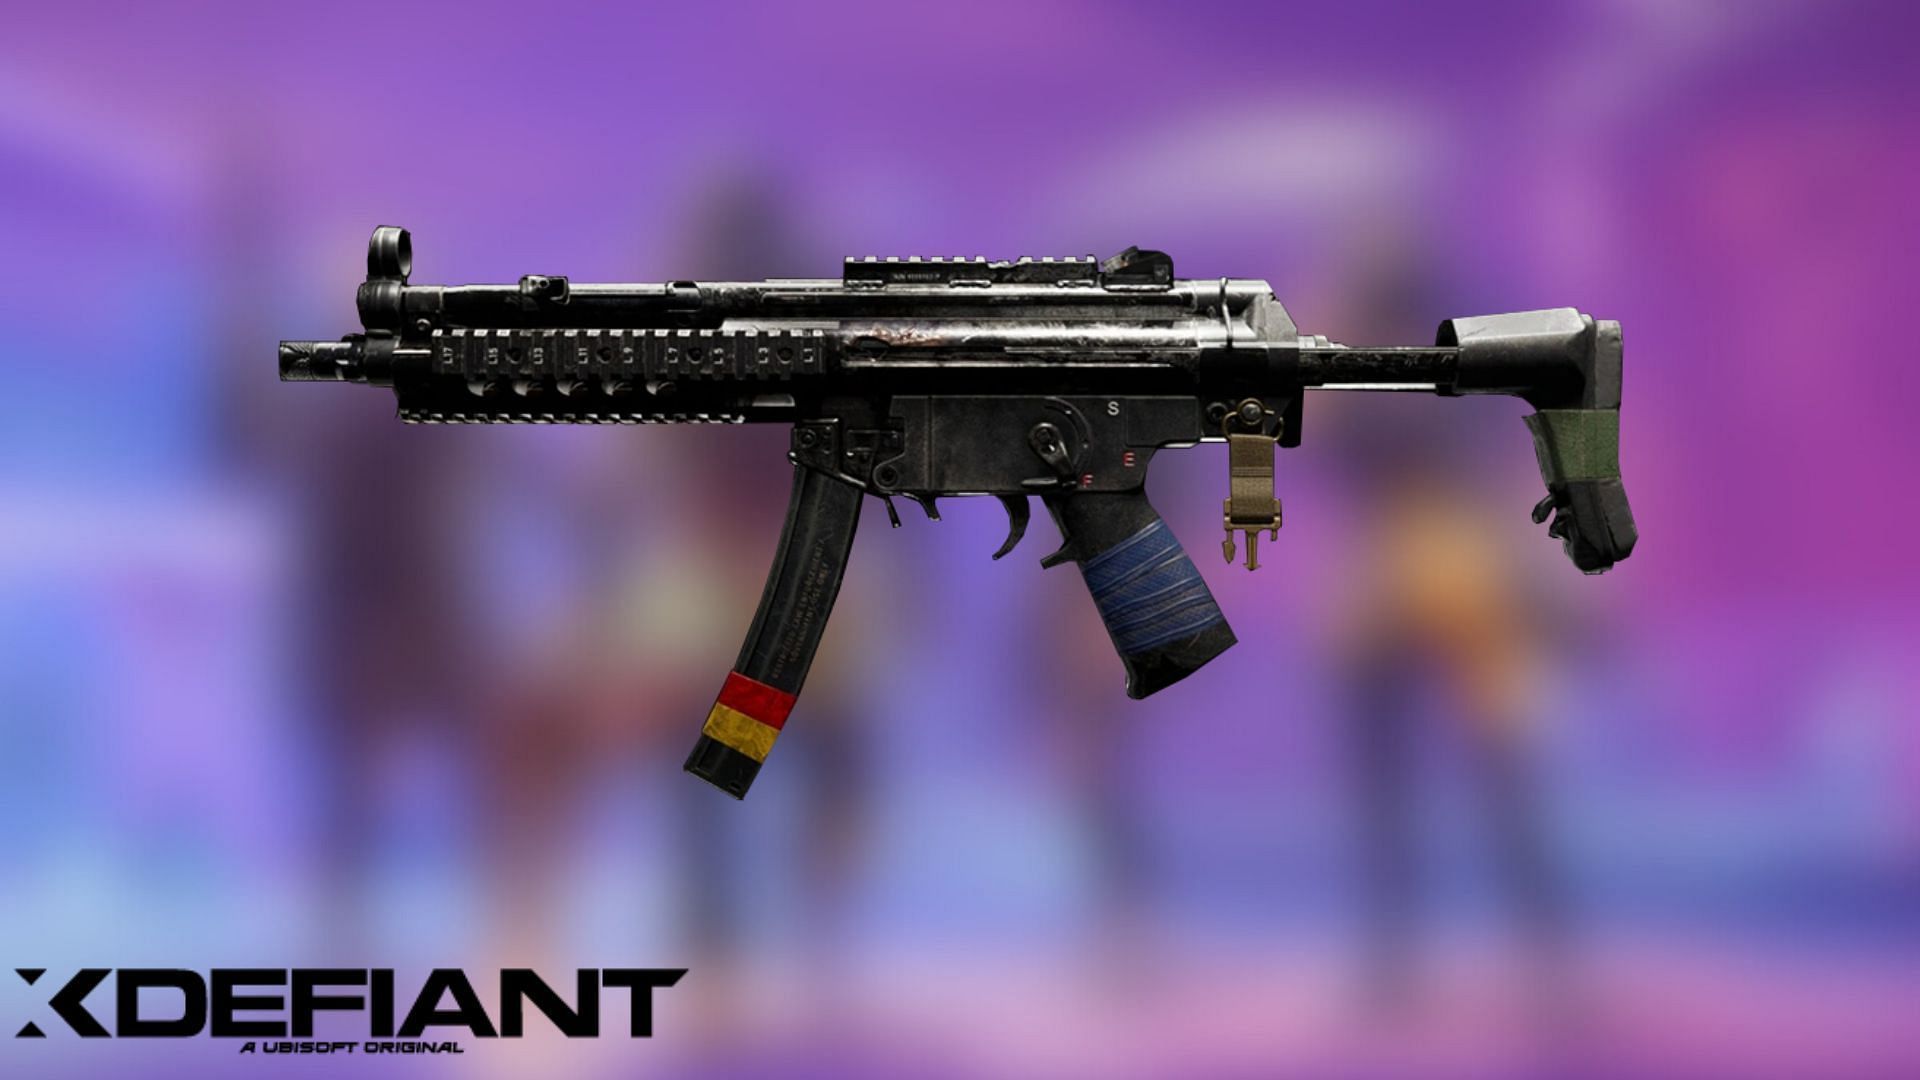 Best MP5A2 loadout and class setup in XDefiant (Image via Ubisoft)